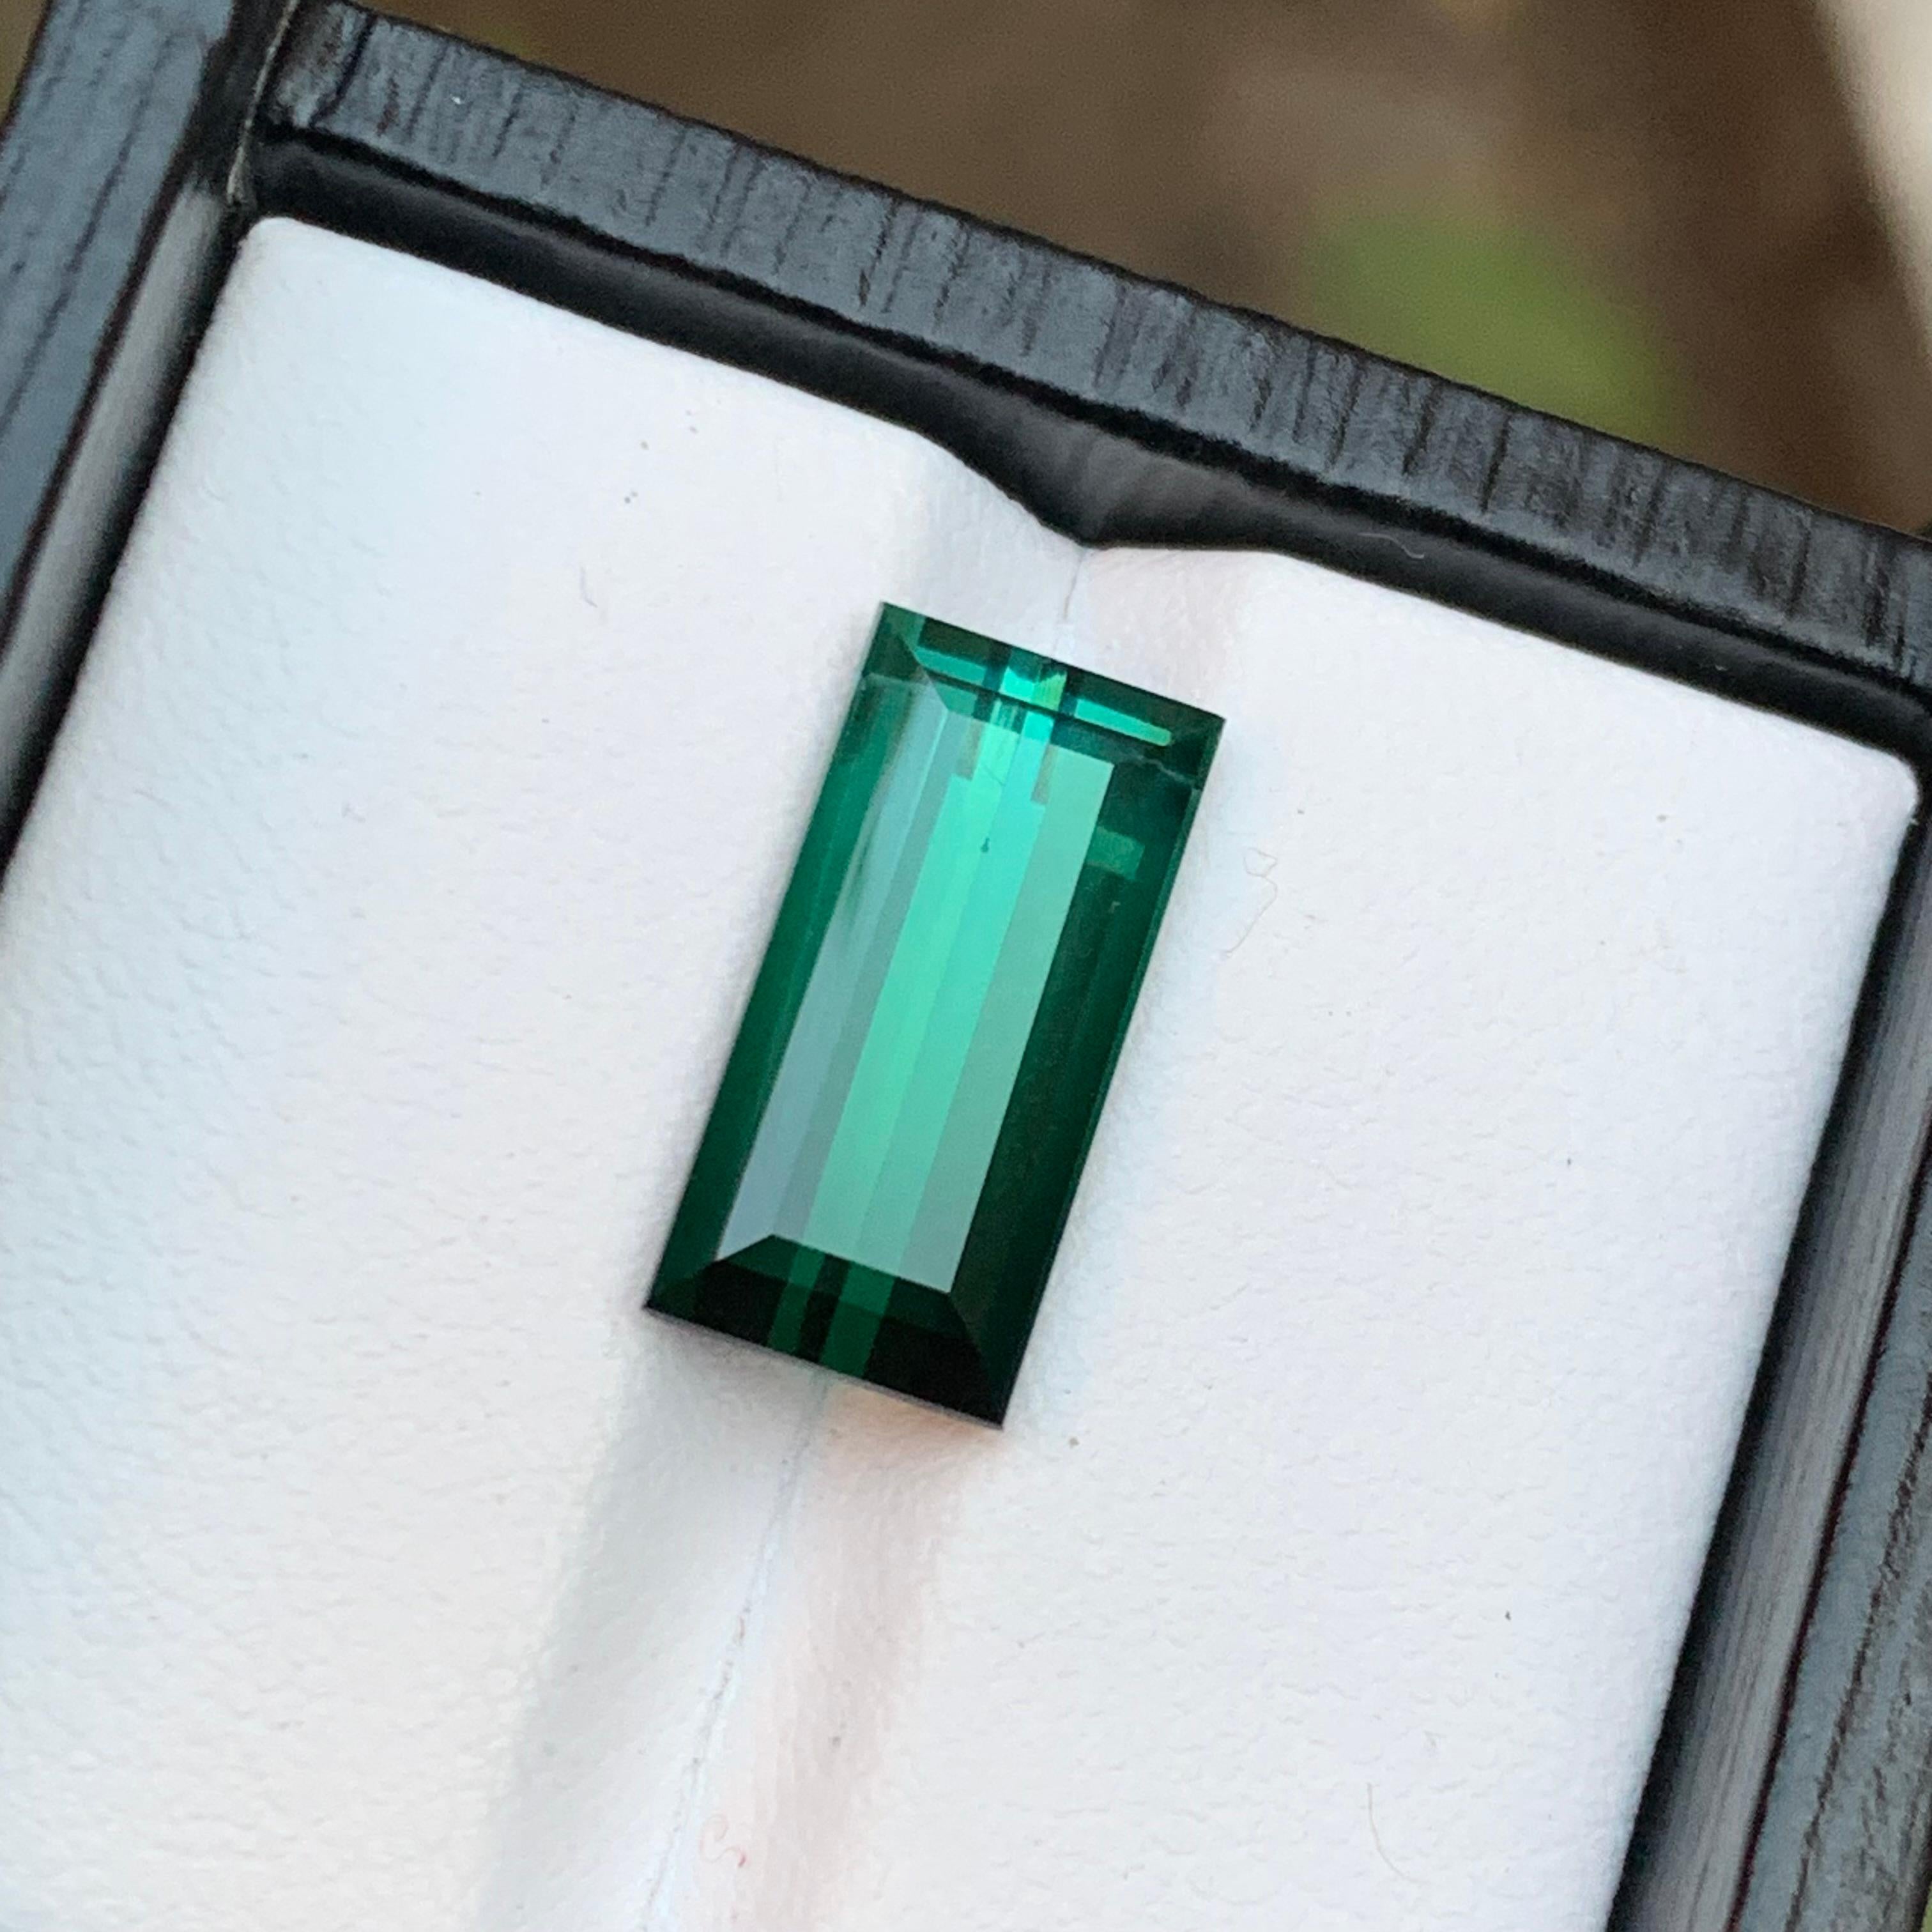 Gemstone Type: Tourmaline
Weight: 6.45 Carats
Dimensions:  15.09 x 7.39 x 6.24 mm
Color: Deep Bluish Green
Clarity: 99% Eye Clean
Treatment: Untreated 
Origin: Afghanistan
Certificate: On demand 

This stunning tourmaline gemstone is a deep, rich